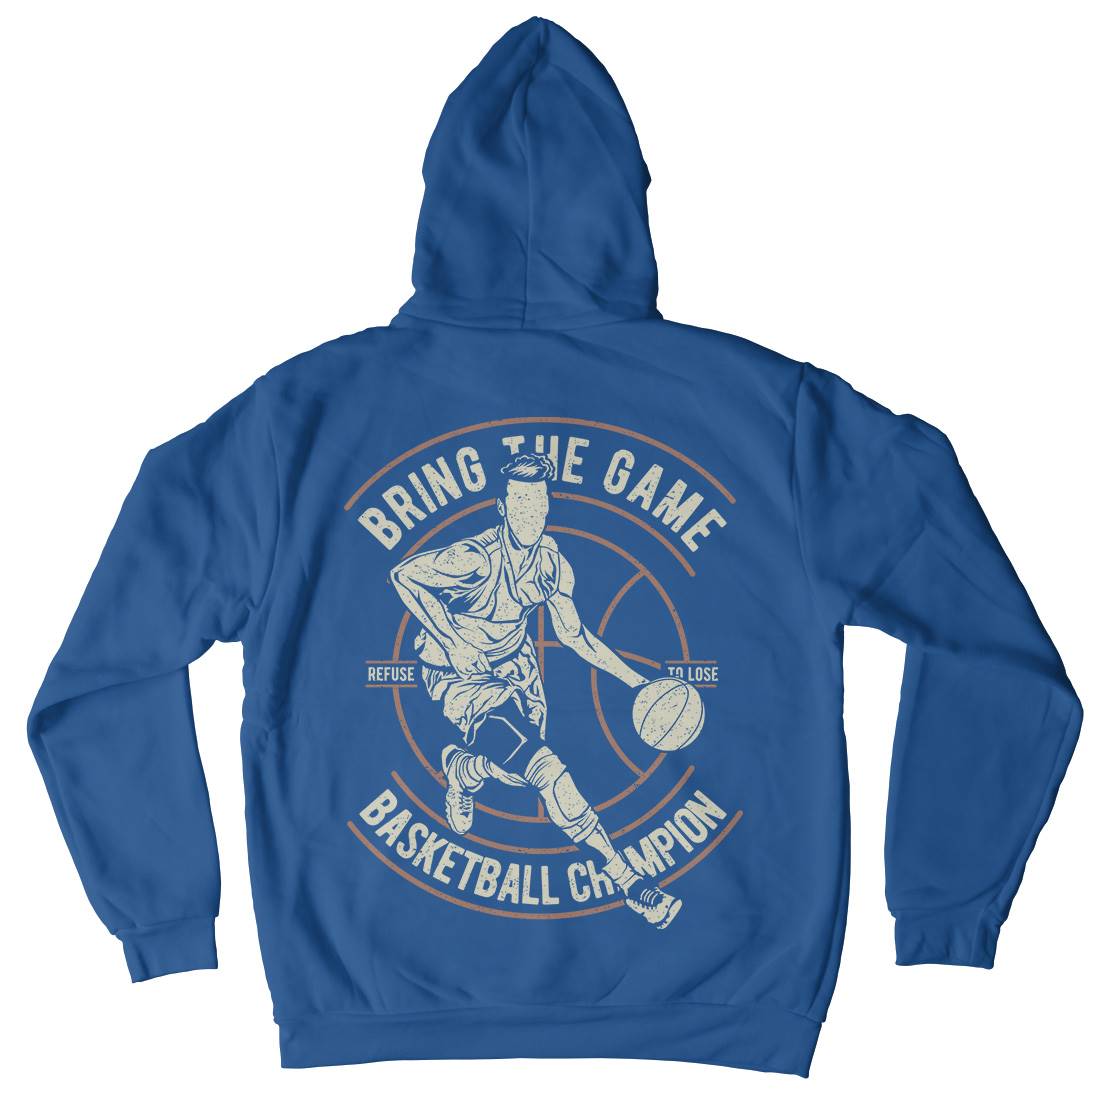 Bring The Game Mens Hoodie With Pocket Sport A627